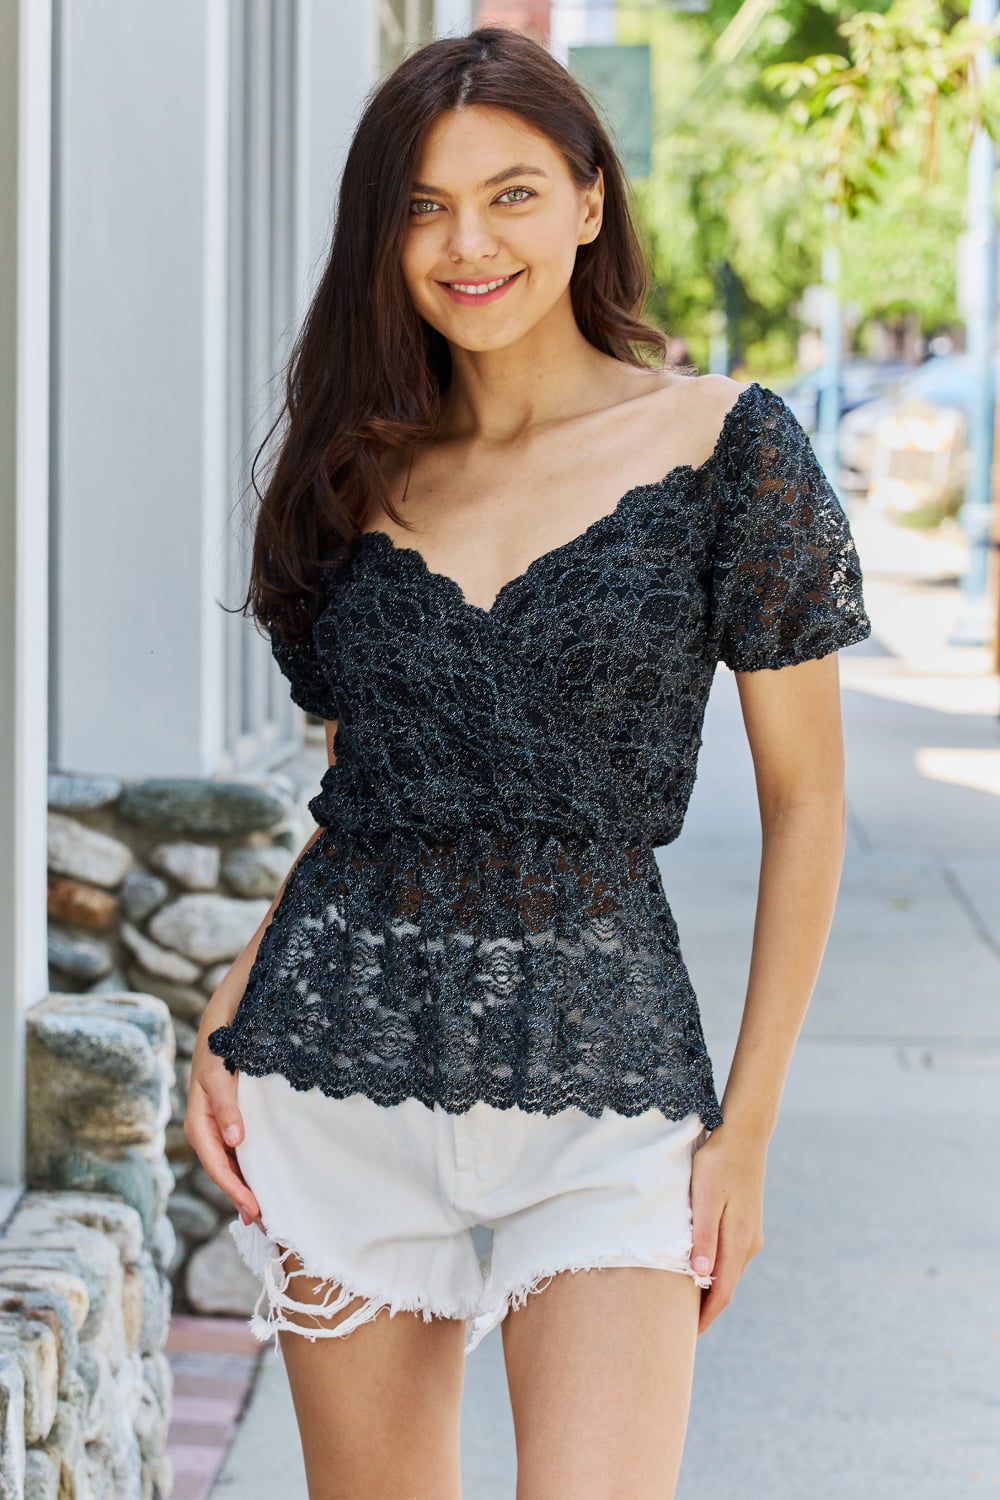 BACK TO COLLEGE    Show Stopper Glittler Peplum Top